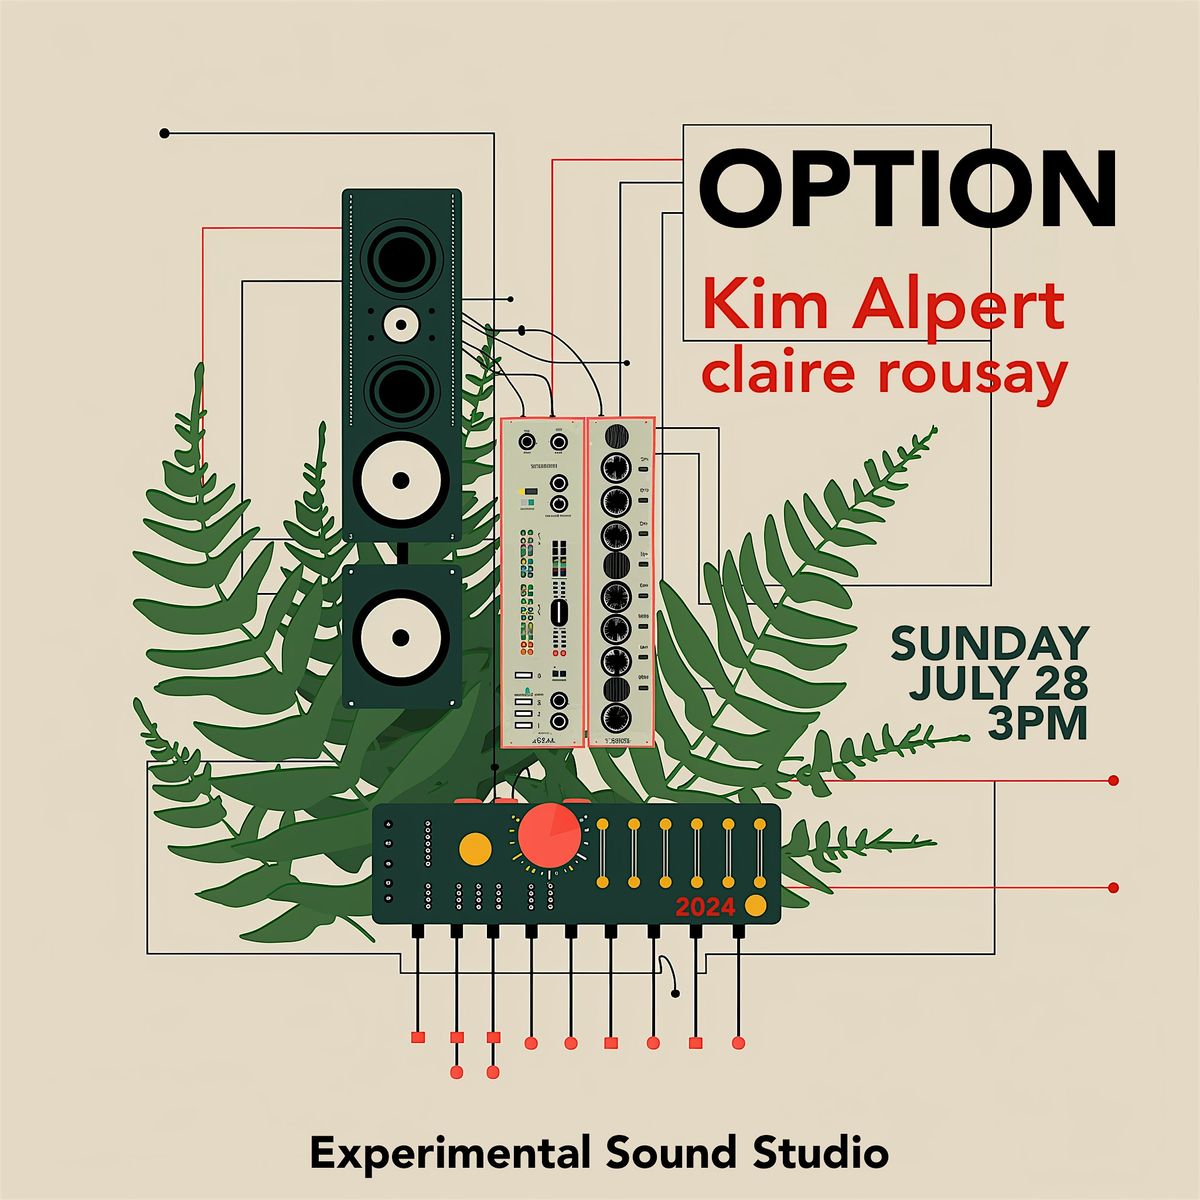 OPTION: Kim Alpert with claire rousay